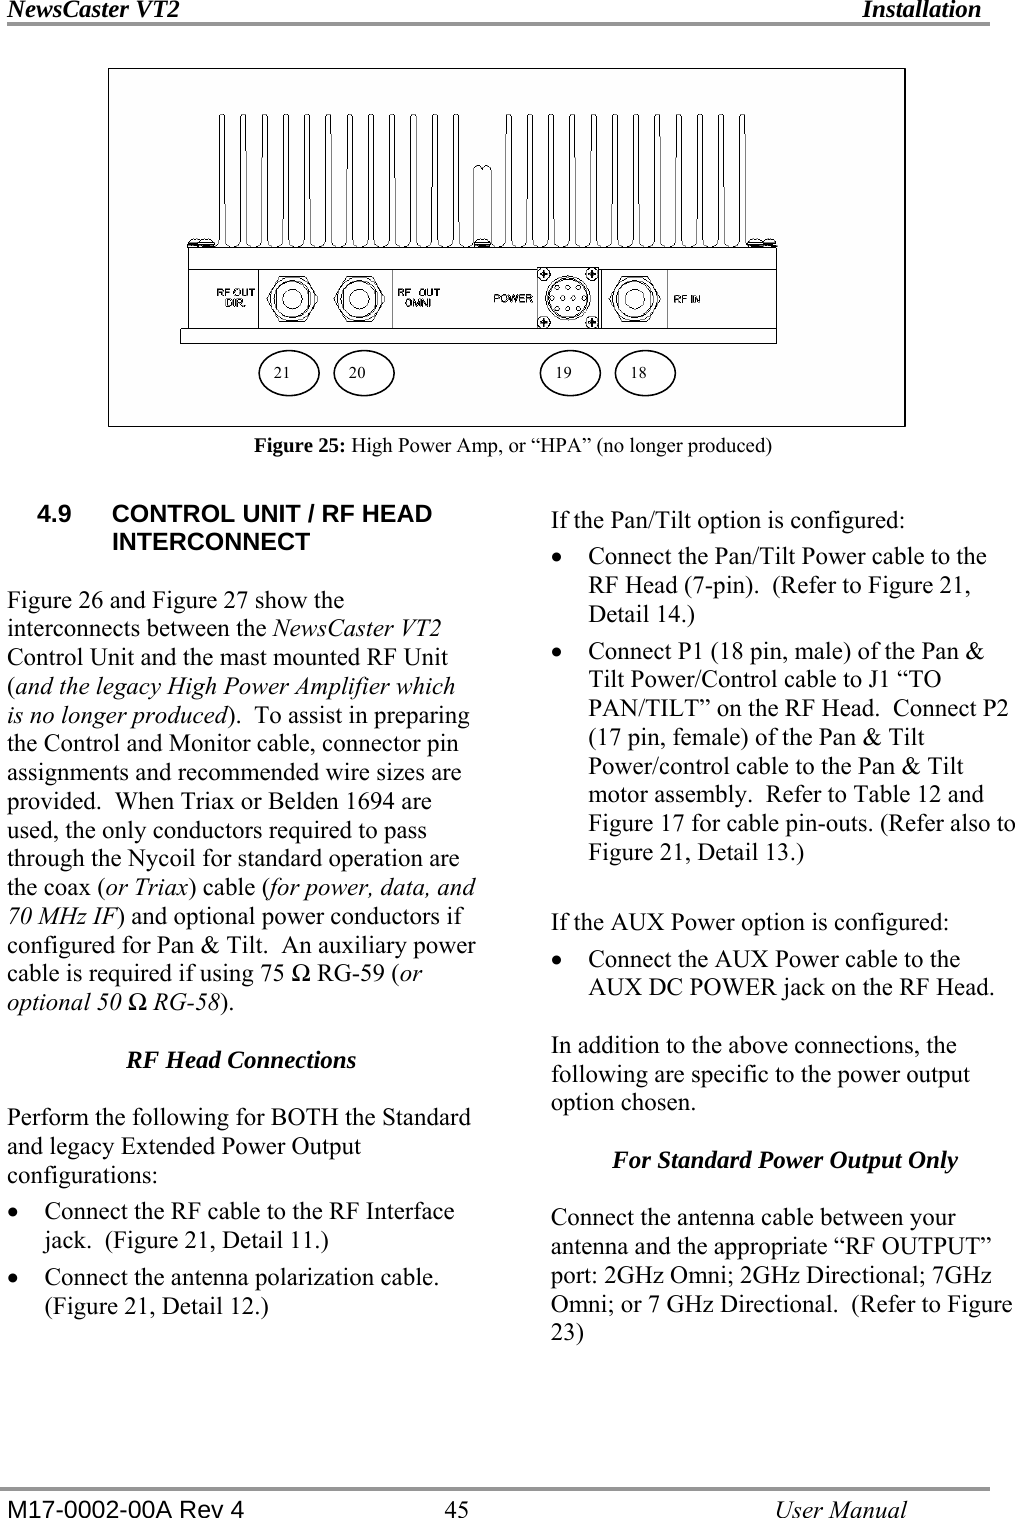 NewsCaster VT2    Installation  M17-0002-00A Rev 4 45   User Manual           Figure 25: High Power Amp, or “HPA” (no longer produced)  4.9  CONTROL UNIT / RF HEAD INTERCONNECT  Figure 26 and Figure 27 show the interconnects between the NewsCaster VT2 Control Unit and the mast mounted RF Unit (and the legacy High Power Amplifier which is no longer produced).  To assist in preparing the Control and Monitor cable, connector pin assignments and recommended wire sizes are provided.  When Triax or Belden 1694 are used, the only conductors required to pass through the Nycoil for standard operation are the coax (or Triax) cable (for power, data, and 70 MHz IF) and optional power conductors if configured for Pan &amp; Tilt.  An auxiliary power cable is required if using 75 Ω RG-59 (or optional 50 Ω RG-58).  RF Head Connections  Perform the following for BOTH the Standard and legacy Extended Power Output configurations: • Connect the RF cable to the RF Interface jack.  (Figure 21, Detail 11.) • Connect the antenna polarization cable. (Figure 21, Detail 12.)   If the Pan/Tilt option is configured: • Connect the Pan/Tilt Power cable to the RF Head (7-pin).  (Refer to Figure 21, Detail 14.) • Connect P1 (18 pin, male) of the Pan &amp; Tilt Power/Control cable to J1 “TO PAN/TILT” on the RF Head.  Connect P2 (17 pin, female) of the Pan &amp; Tilt Power/control cable to the Pan &amp; Tilt motor assembly.  Refer to Table 12 and Figure 17 for cable pin-outs. (Refer also to Figure 21, Detail 13.)  If the AUX Power option is configured: • Connect the AUX Power cable to the AUX DC POWER jack on the RF Head.  In addition to the above connections, the following are specific to the power output option chosen.  For Standard Power Output Only  Connect the antenna cable between your antenna and the appropriate “RF OUTPUT” port: 2GHz Omni; 2GHz Directional; 7GHz Omni; or 7 GHz Directional.  (Refer to Figure 23)   20 19 1821 